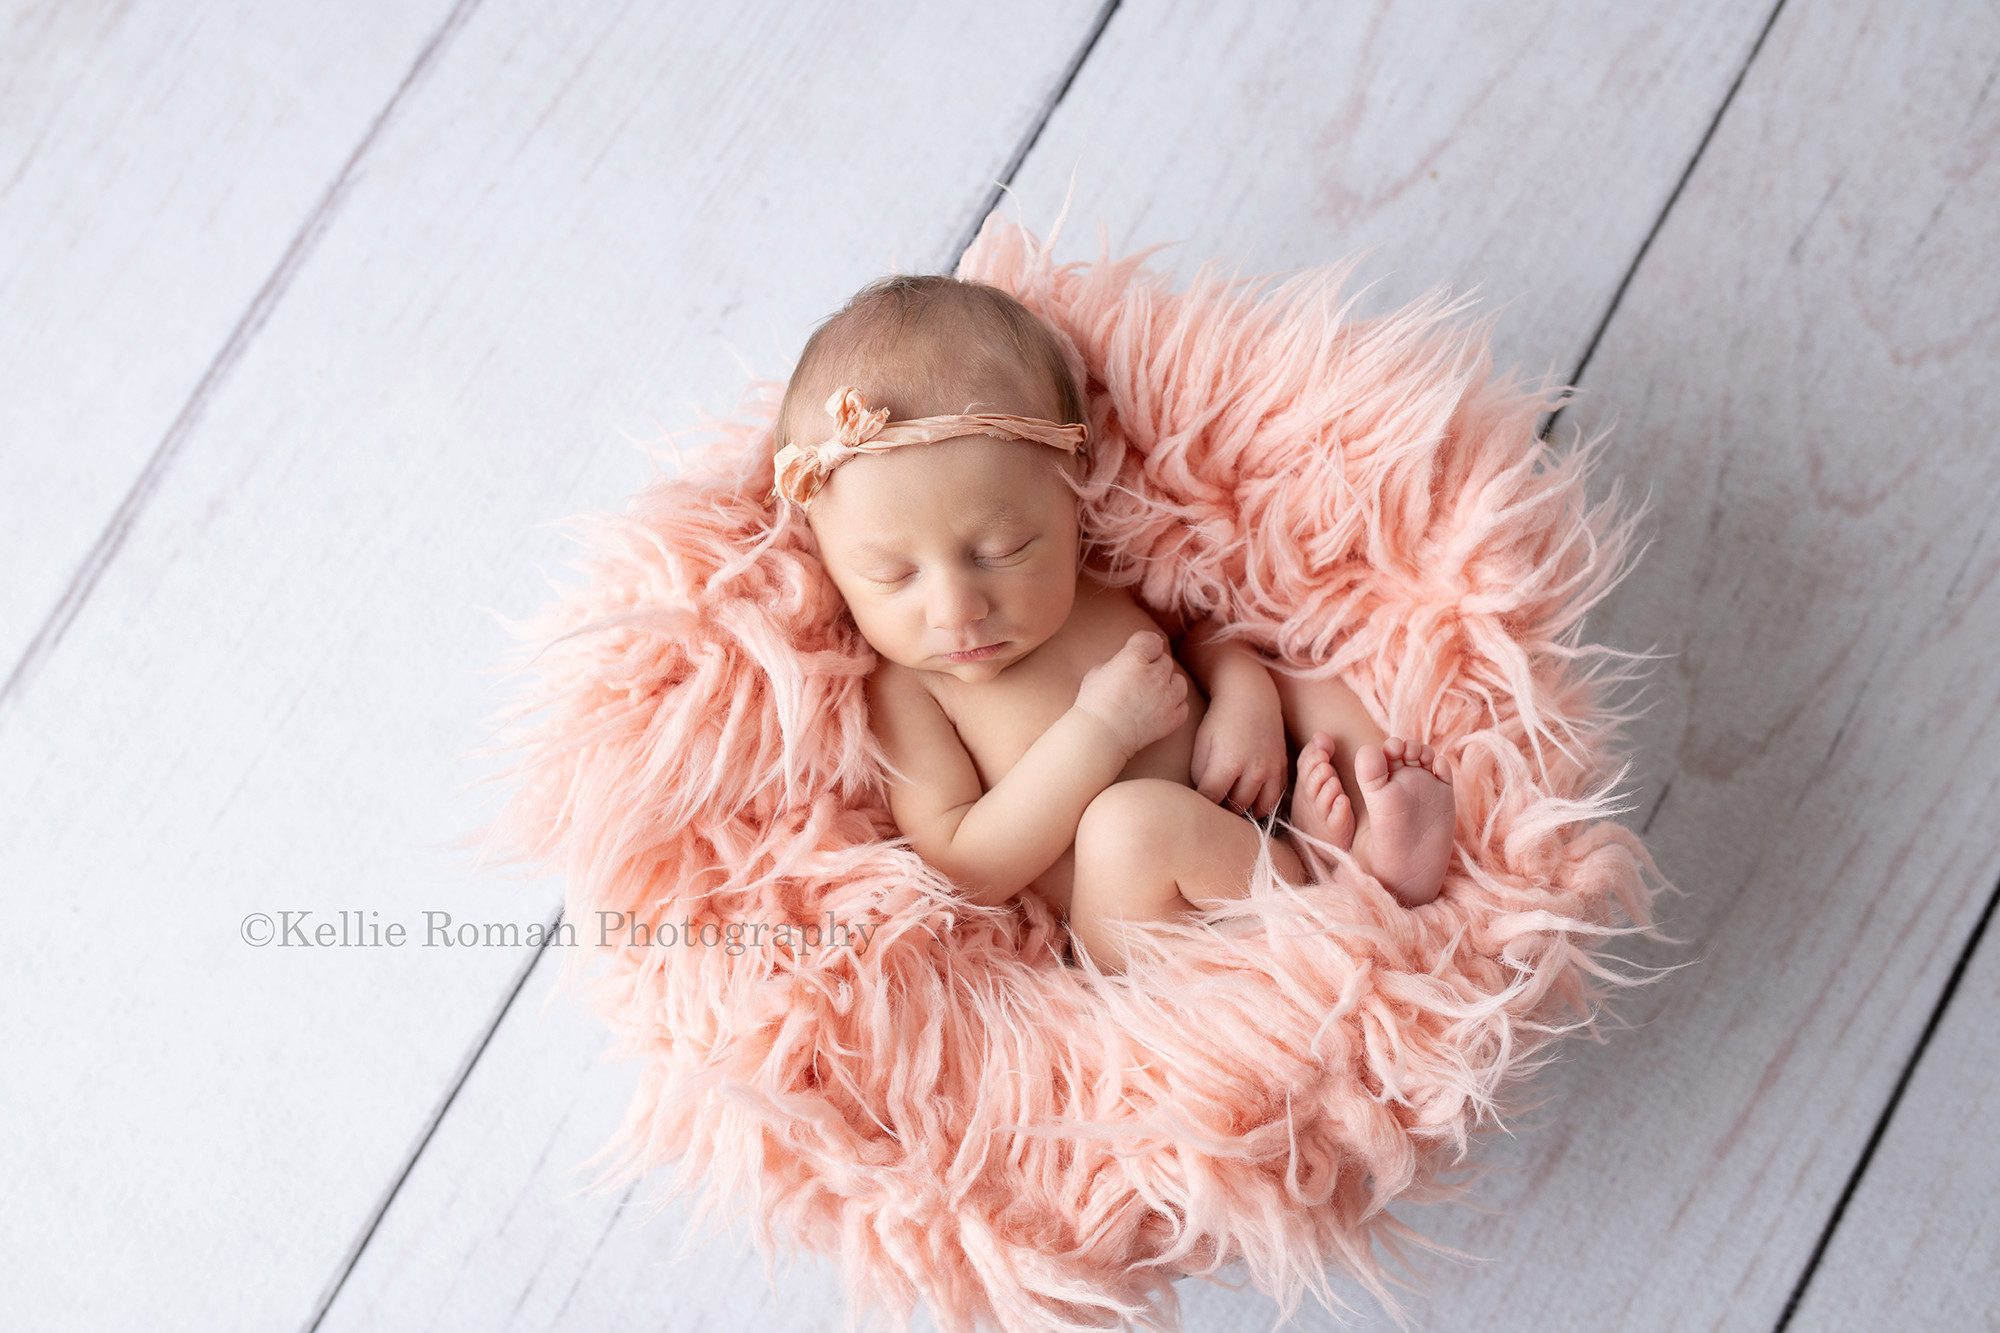 milwaukee baby whisperer a newborn baby girl in a milwaukee photographers studio is naked in a wood tub with pink fur. The newborn is curled up and sleeping and she has on a pink bow headband. She's on top of white wood floor.